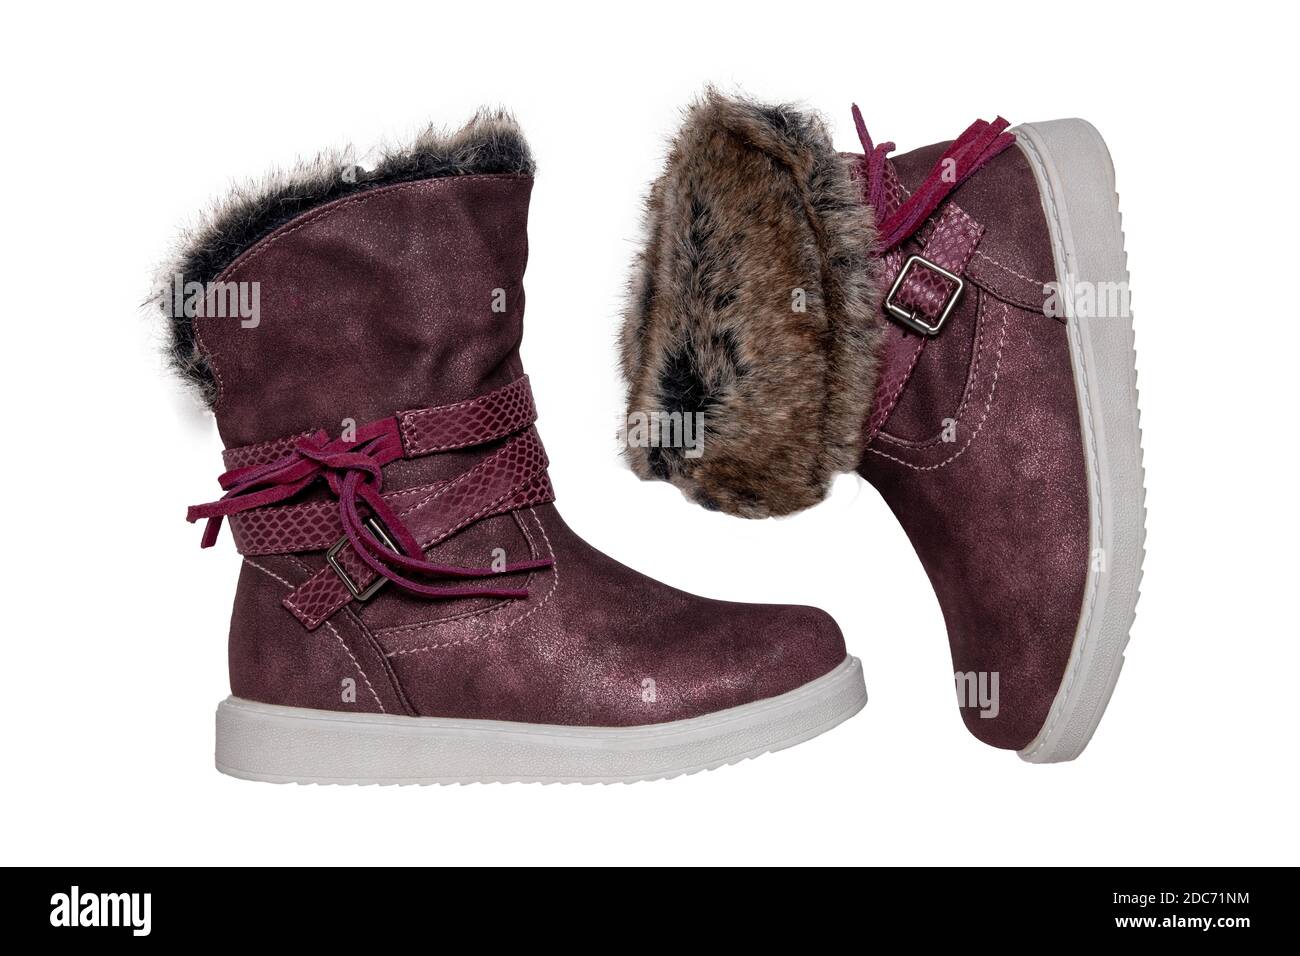 Ugg boots stock and images Alamy